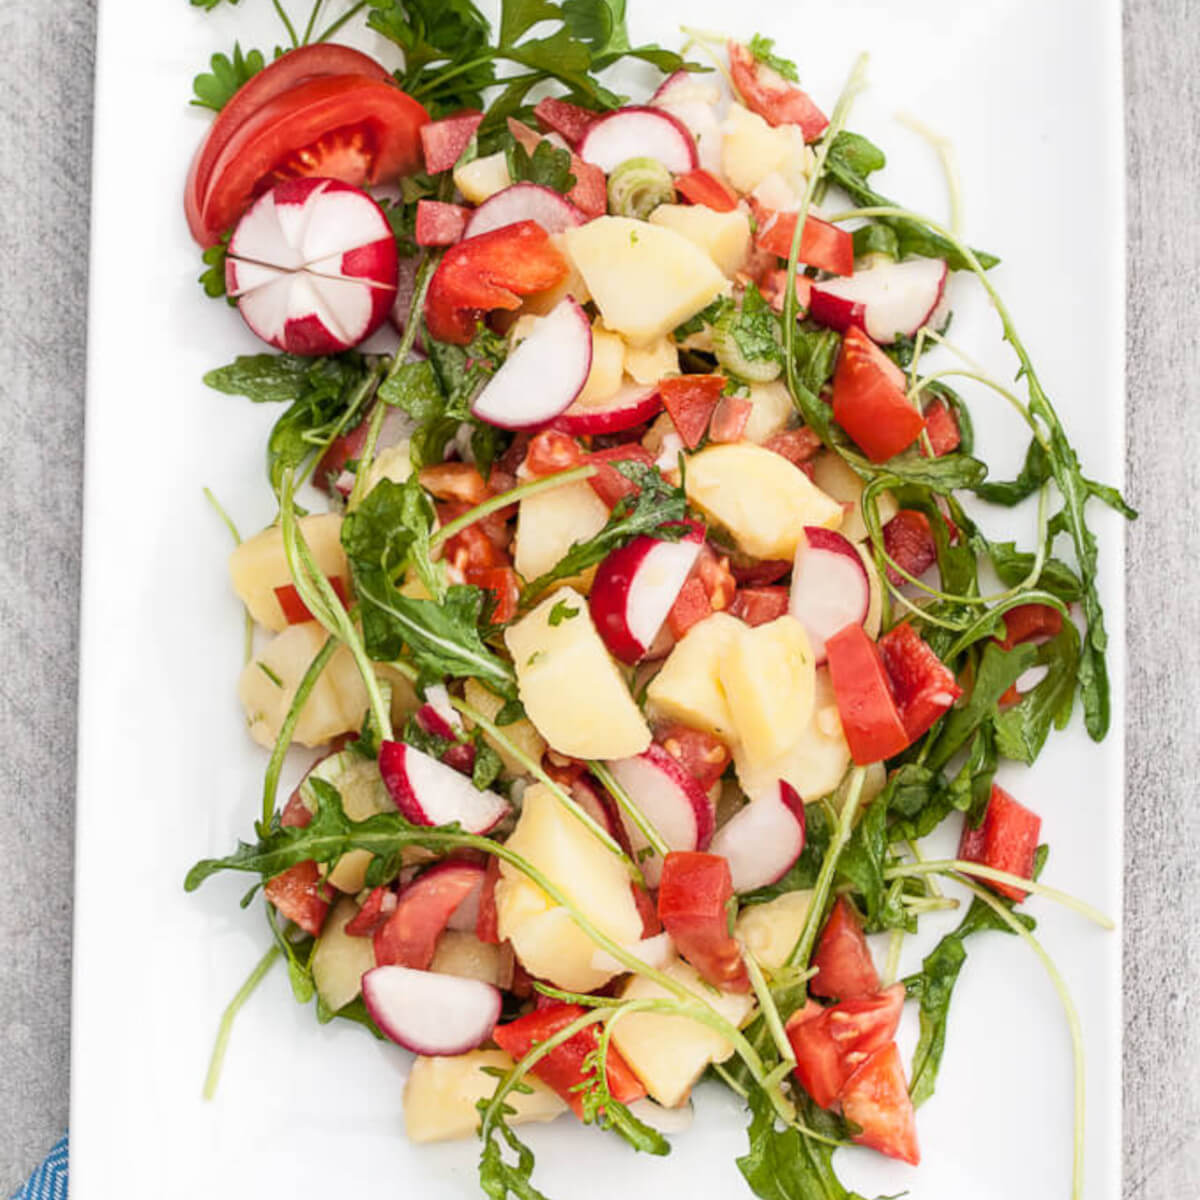 Healthy Vegetable Potato Salad Recipe w/ Bell peppers, tomatoes, radishes, arugula and more! No mayo ;) - VeganFamilyRecipes.com - #vegetables #potatoes